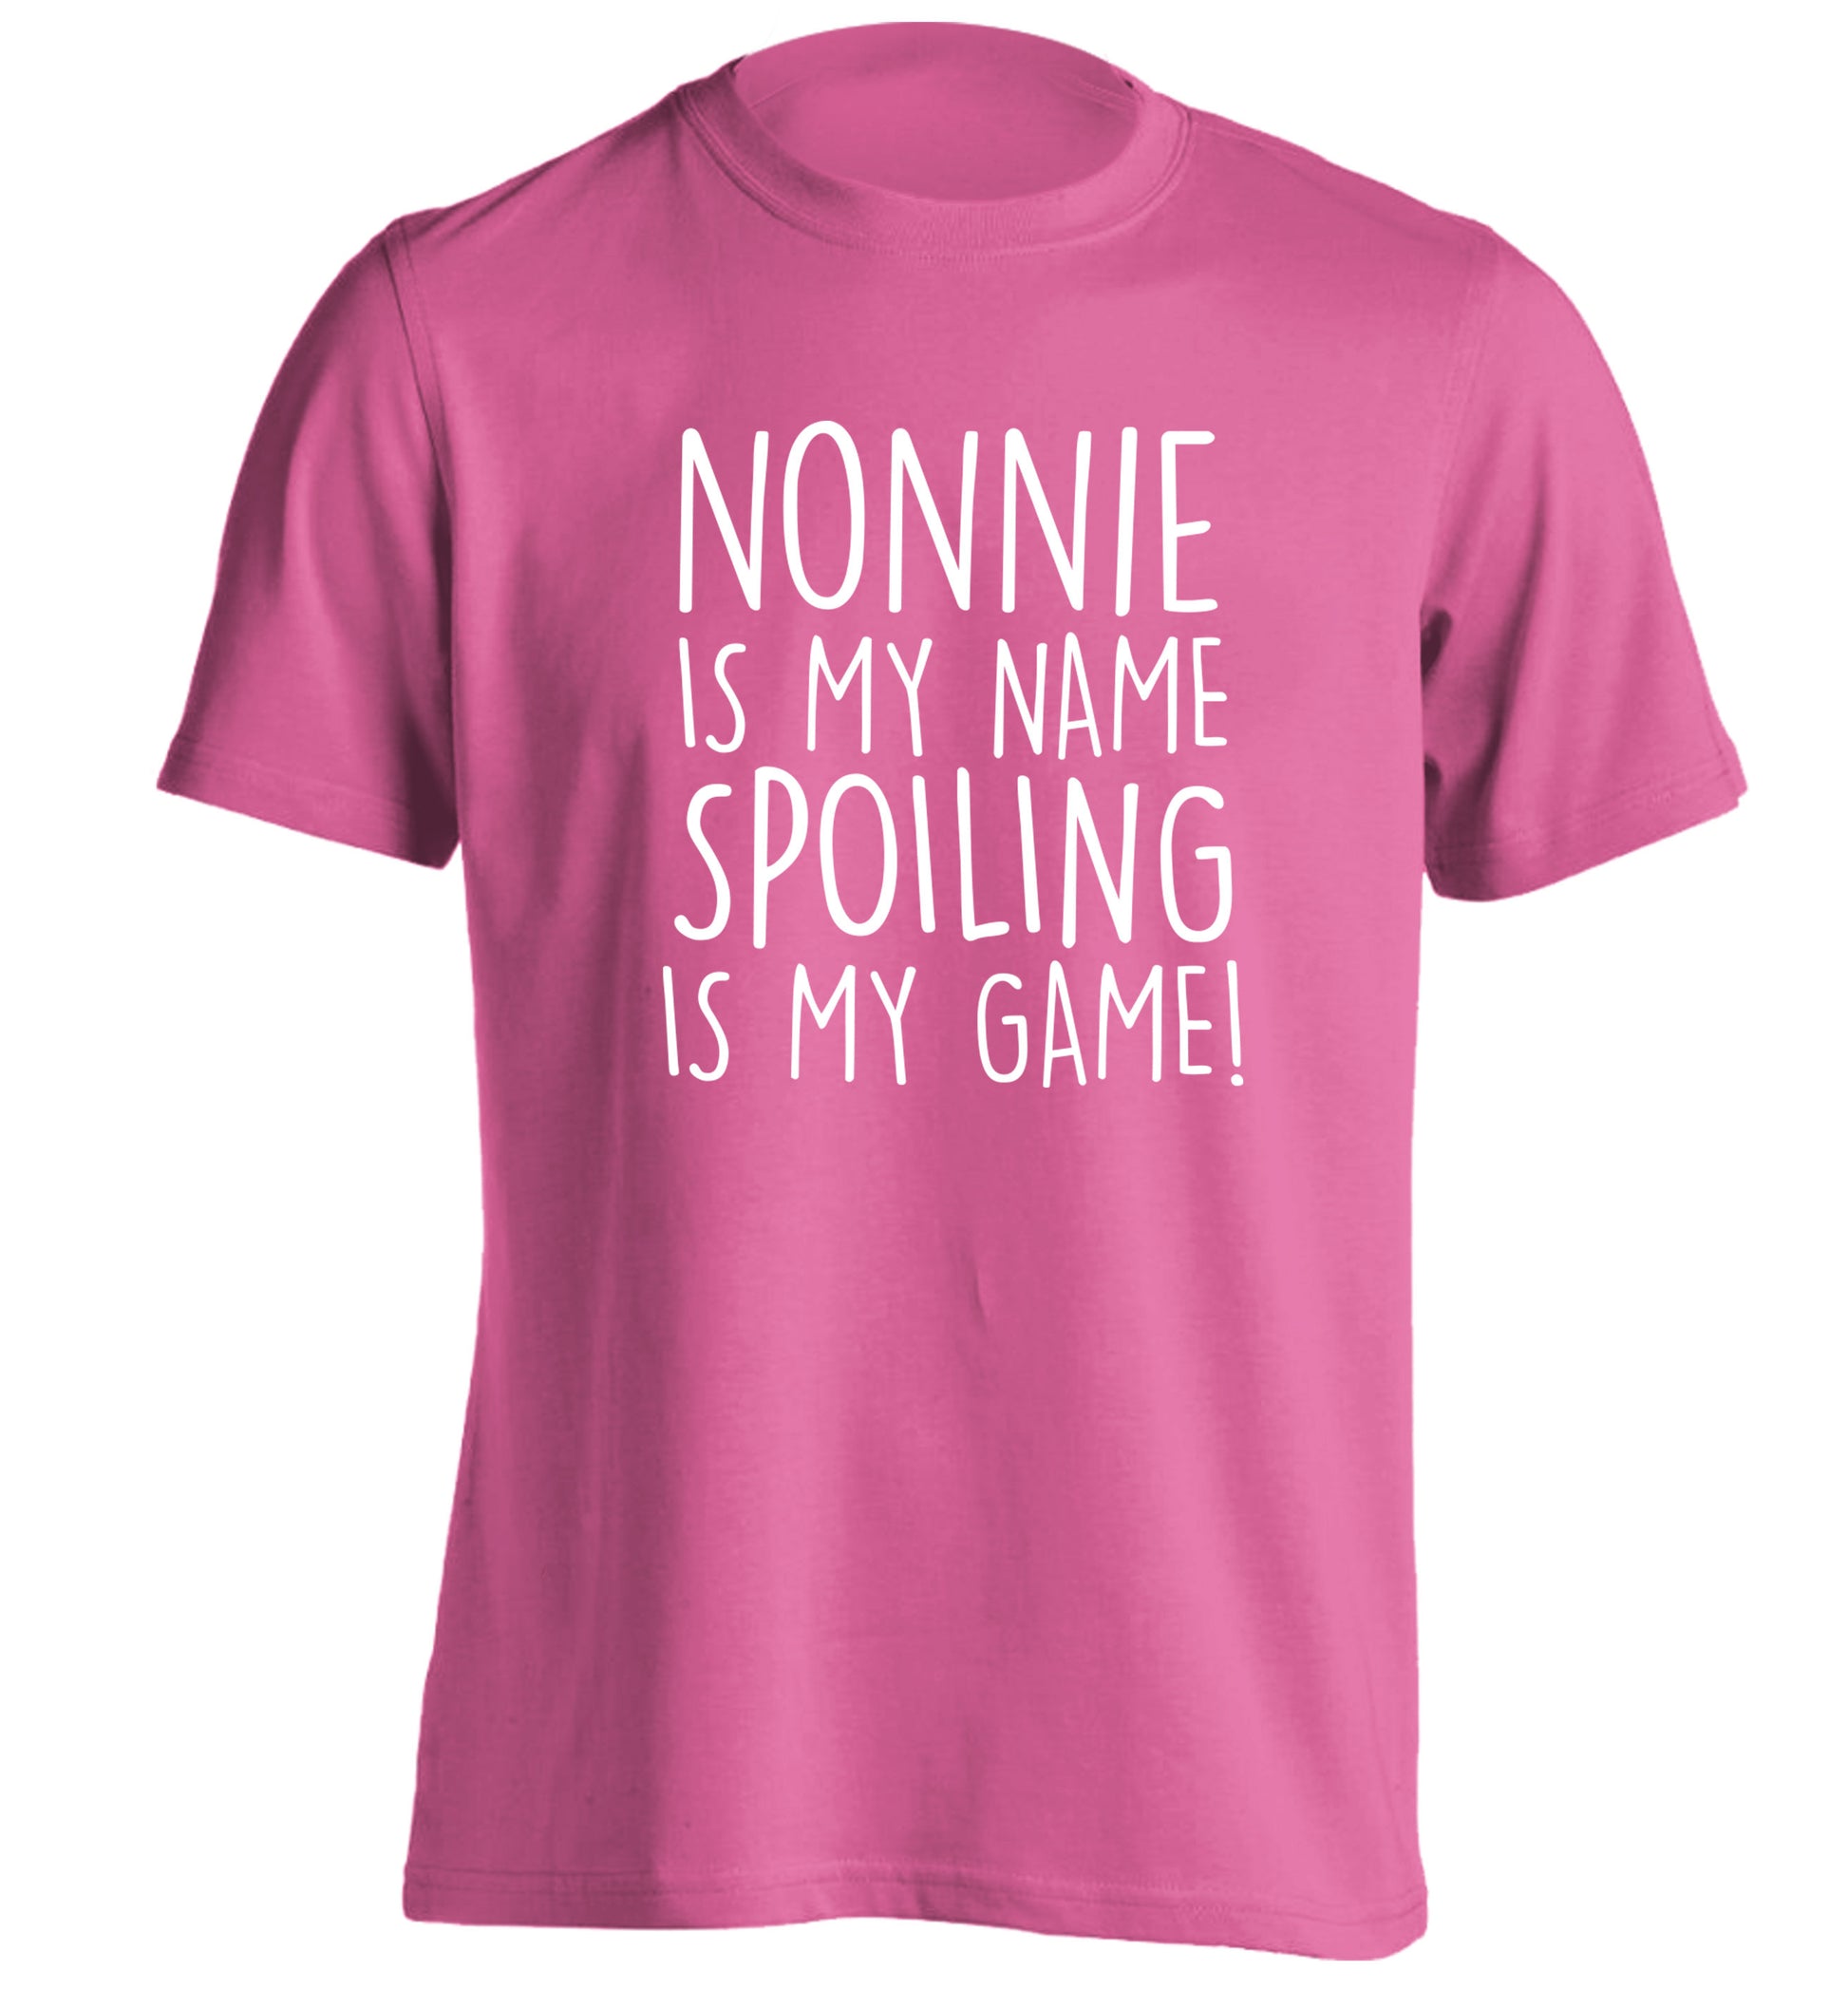 Nonnie is my name, spoiling is my game adults unisex pink Tshirt 2XL